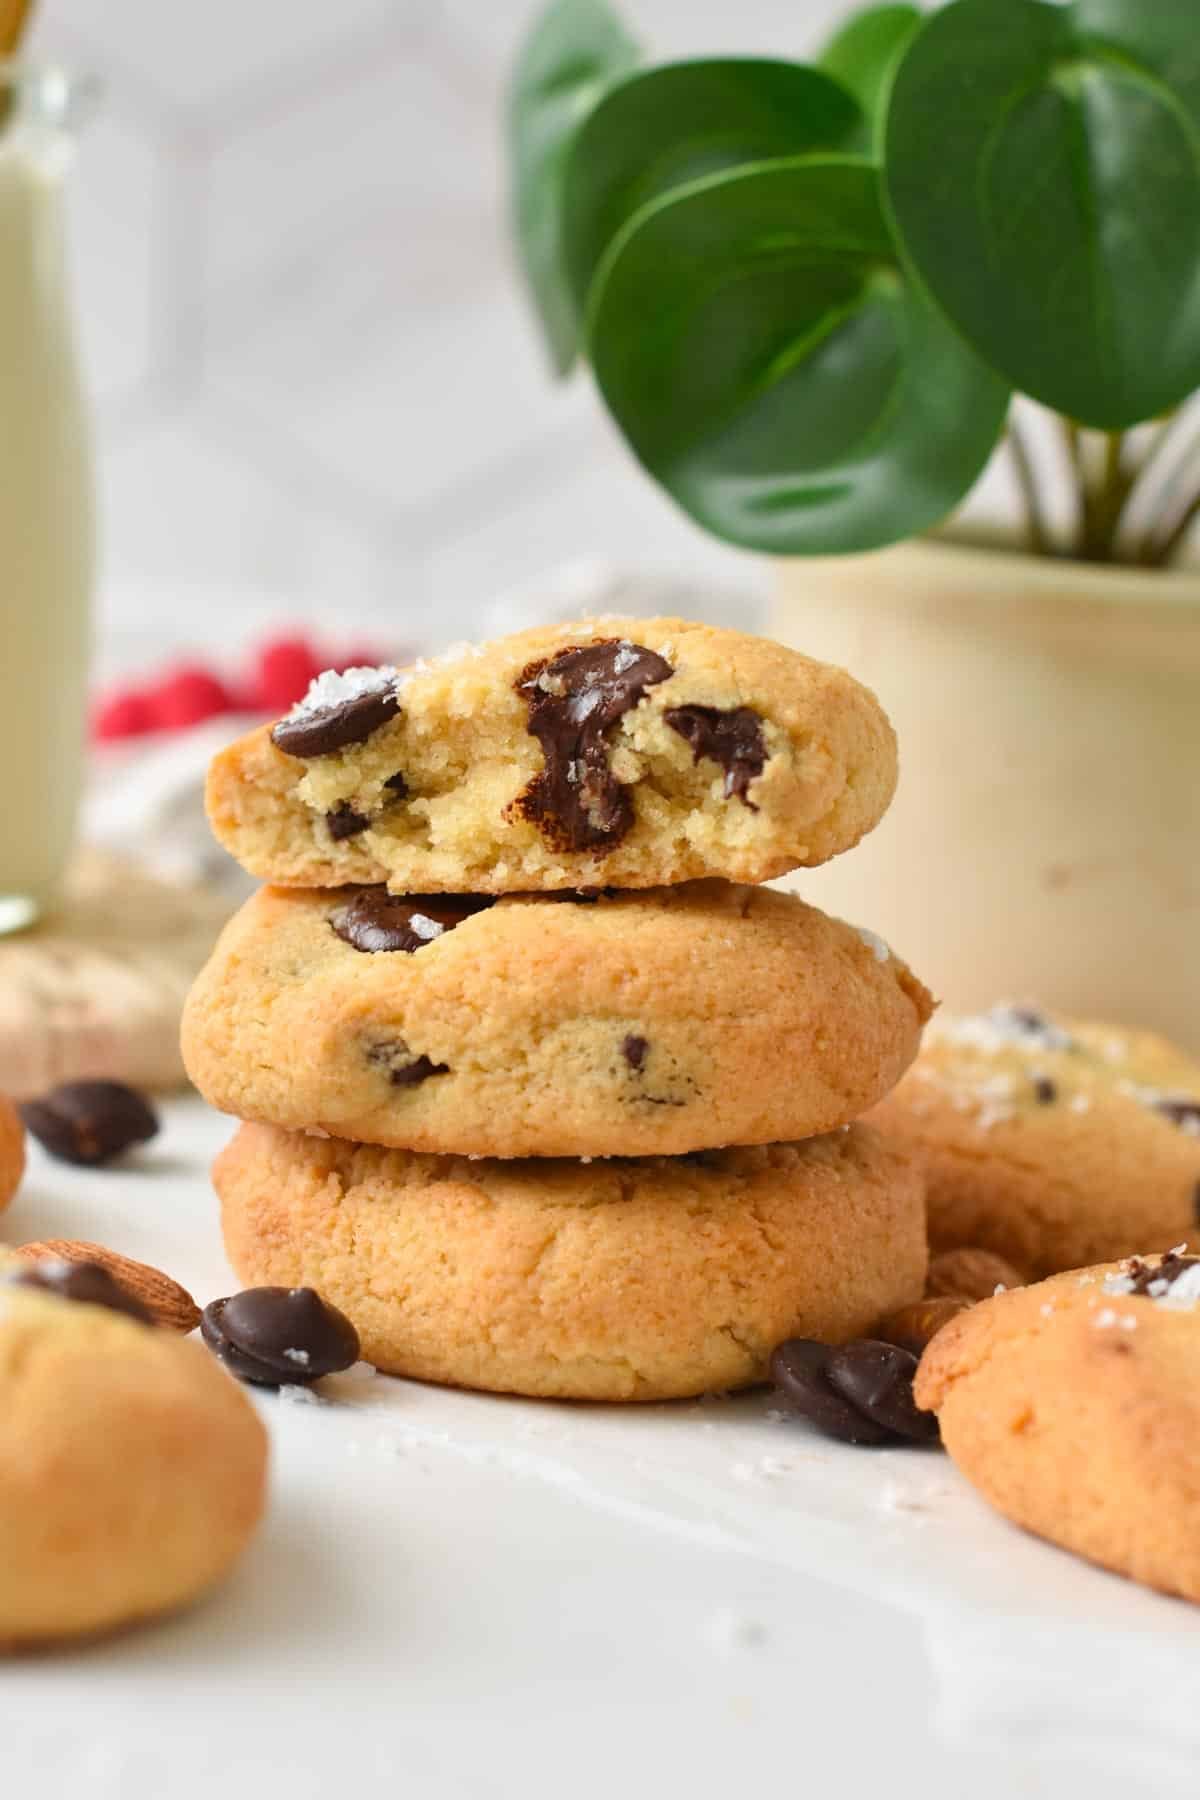 A stack of three Keto Chocolate Chip Cookies made with almond flour and the top cookie half broken showing the soft cookie texture.